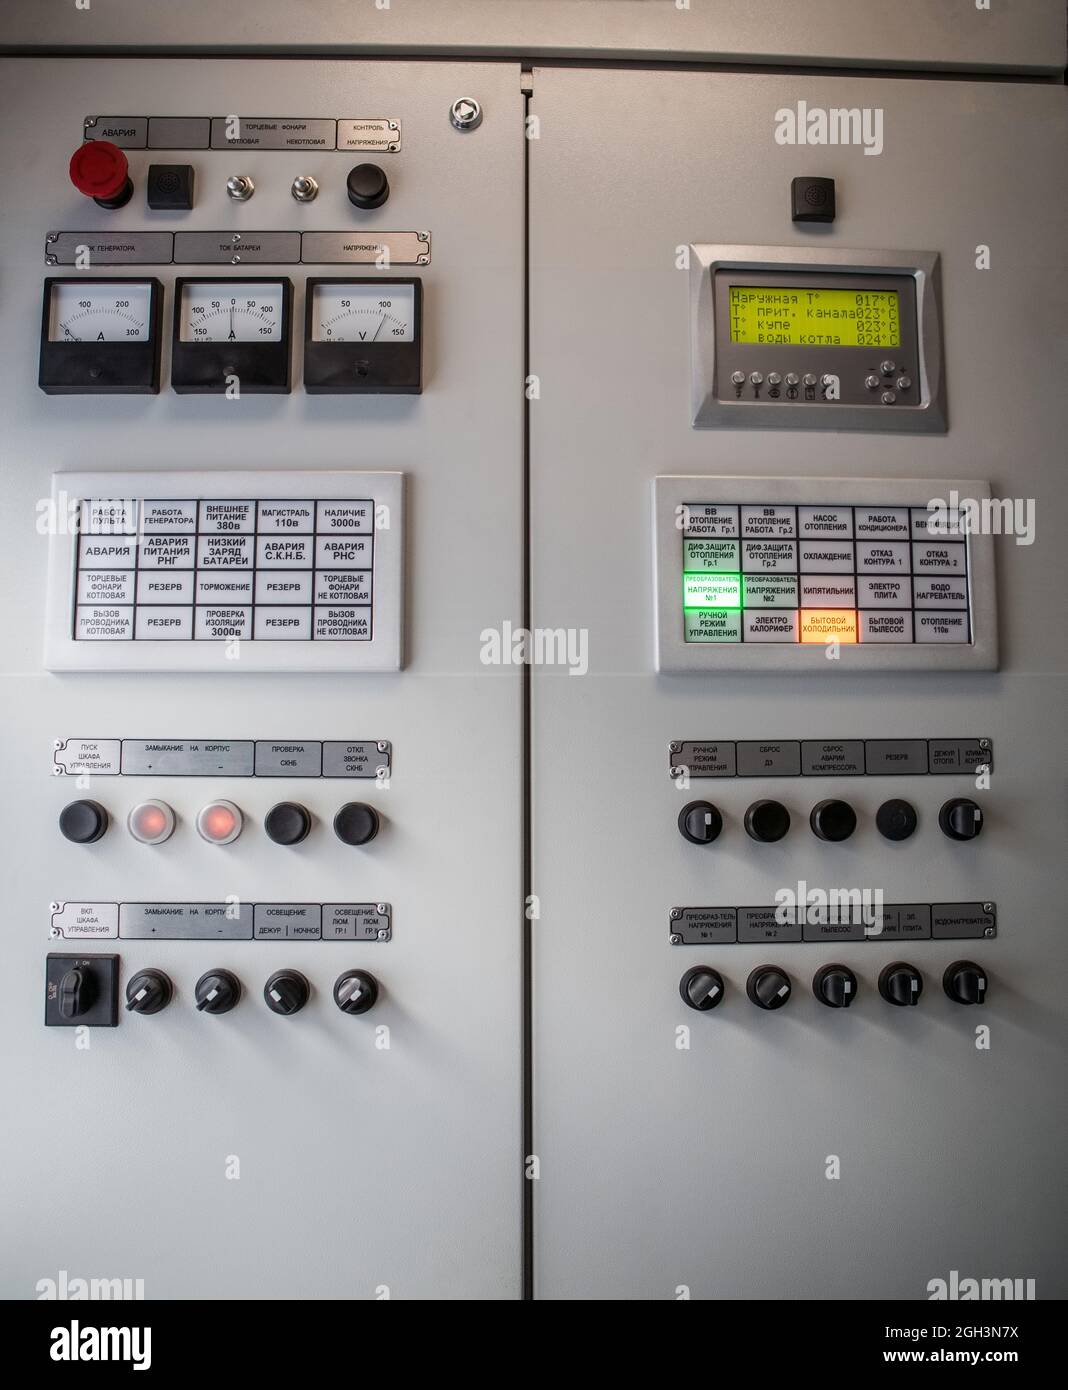 Typical Console for controlling the passenger train car systems. Controll console of sleeping car systems of a railway train. Stock Photo